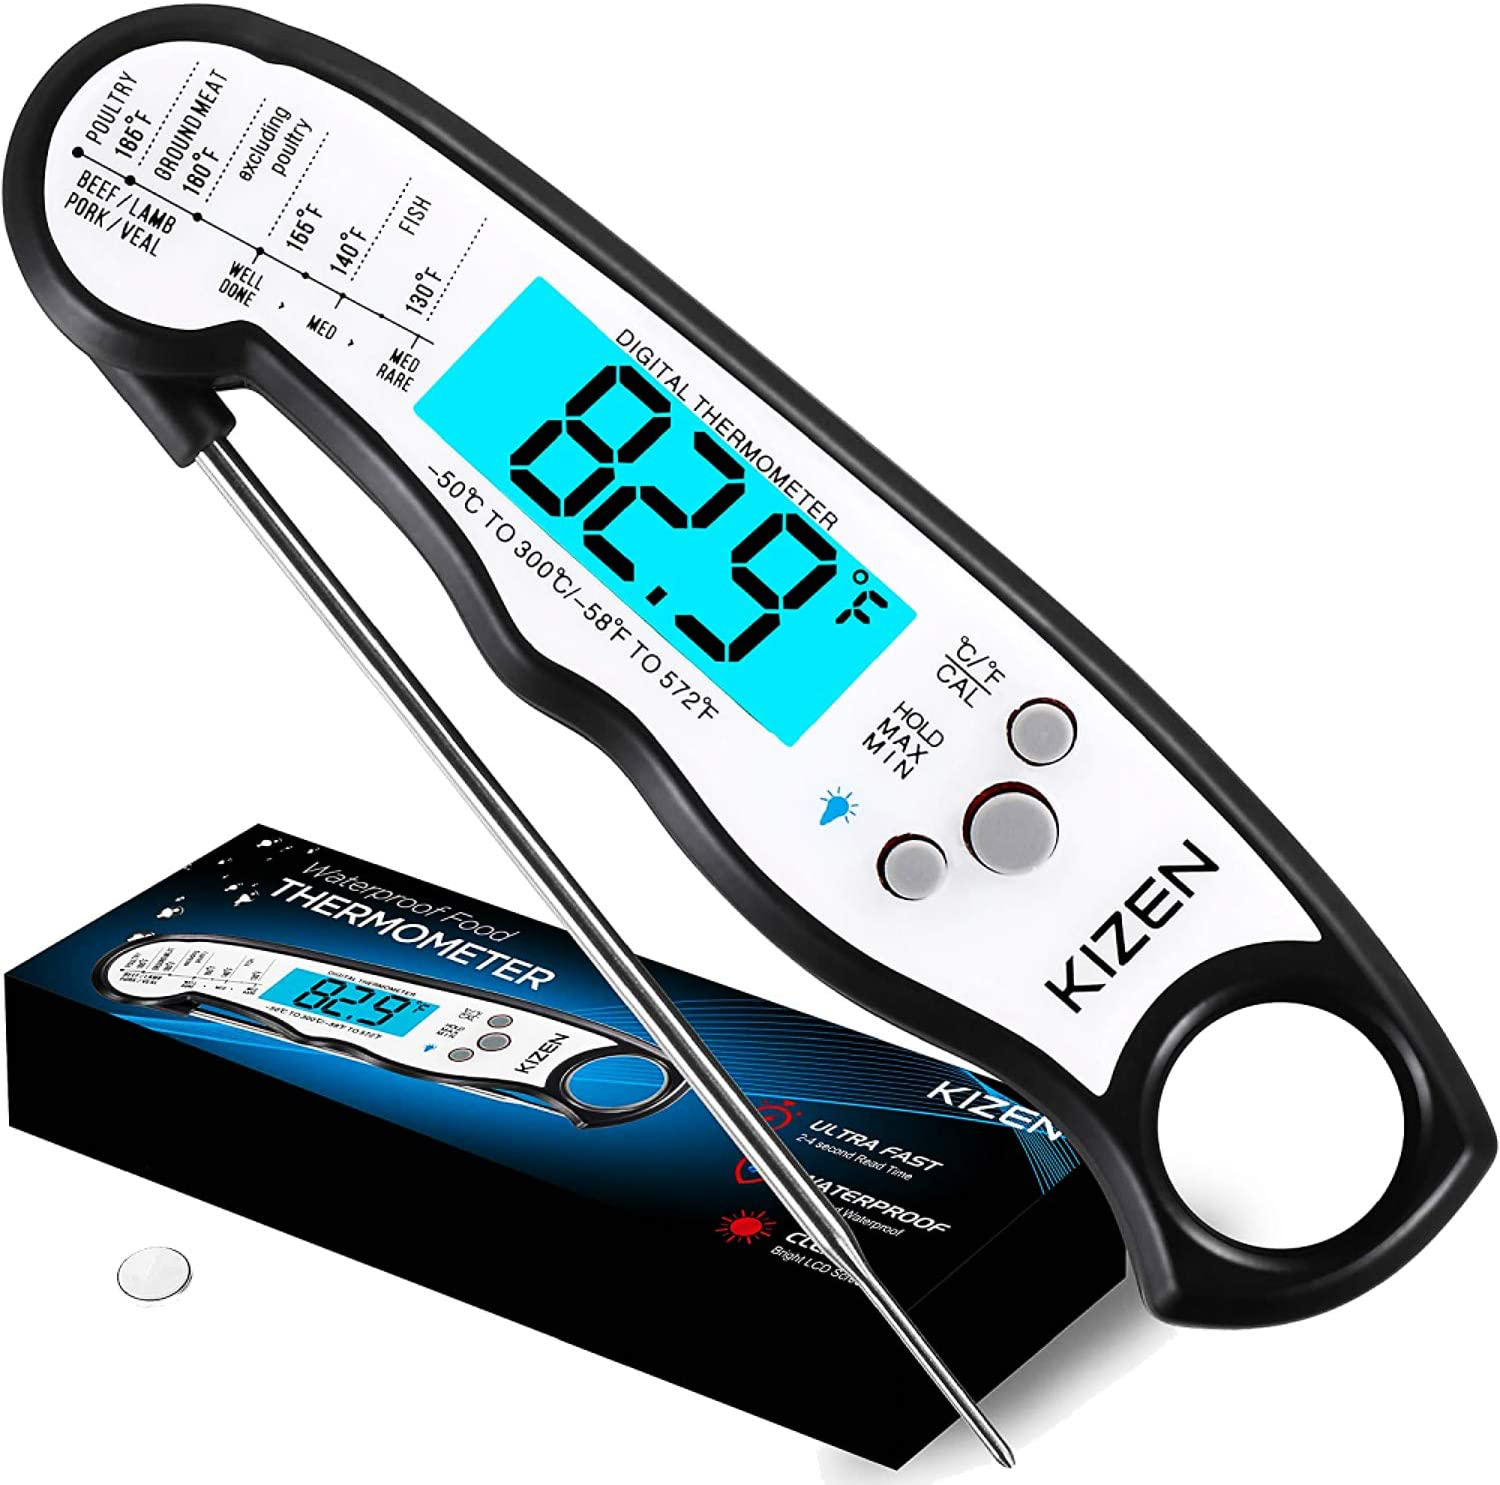 Kizen Digital Meat Thermometers for Cooking - Waterproof Instant Read Food Thermometer for Meat, Deep Frying, Baking, Outdoor Cooking, Grilling, & BBQ